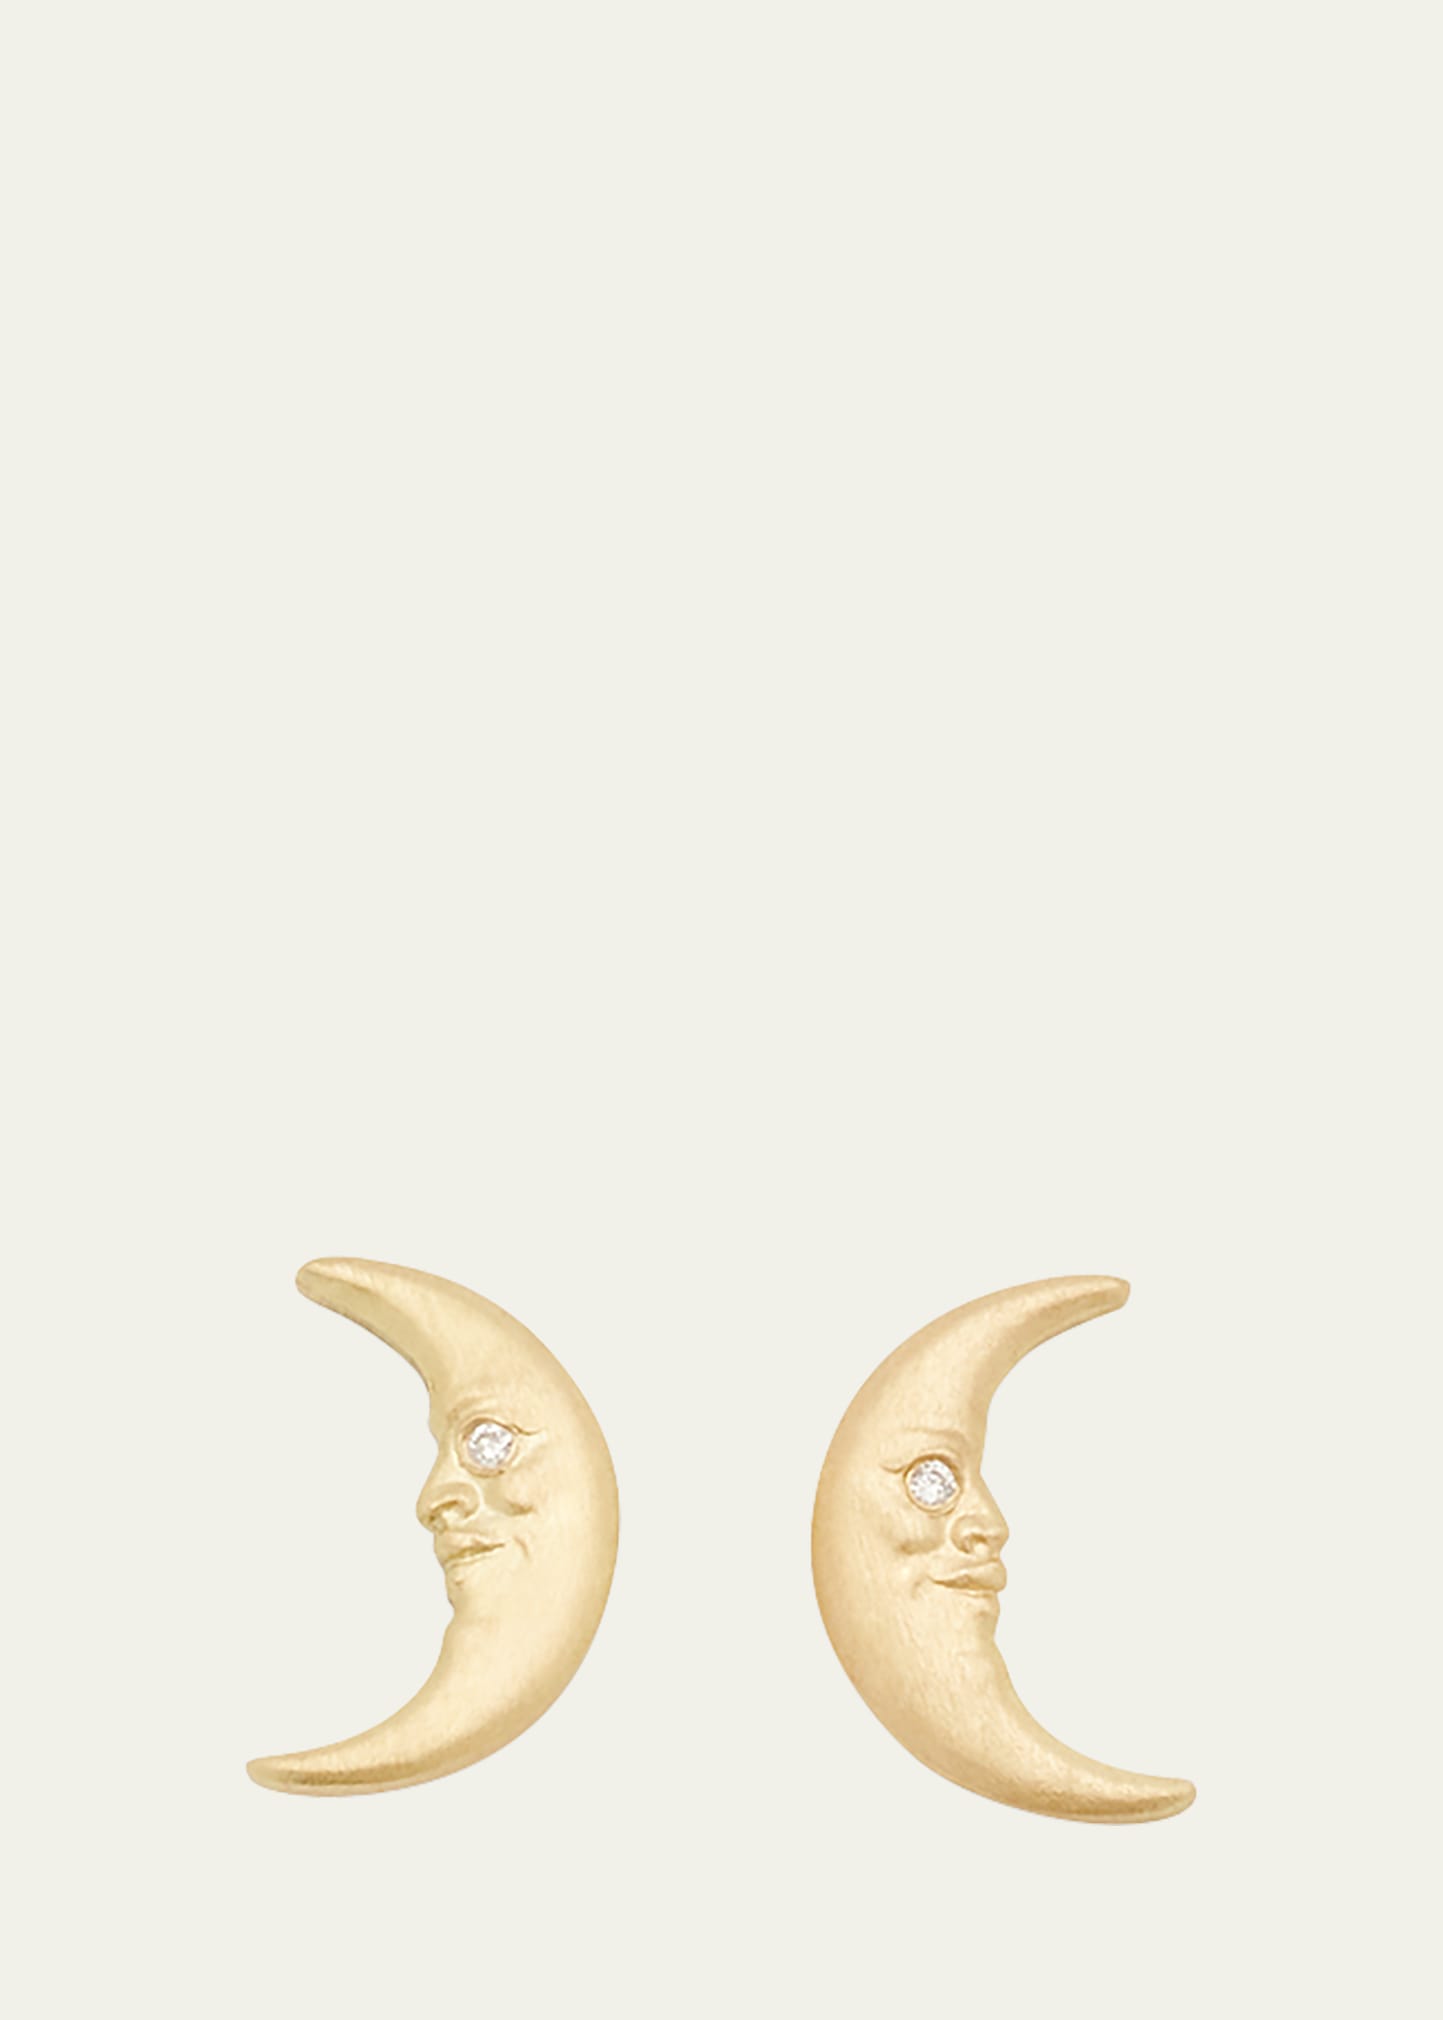 Tiny Crescent Moonface Stud Earrings in 18k Gold with Diamonds